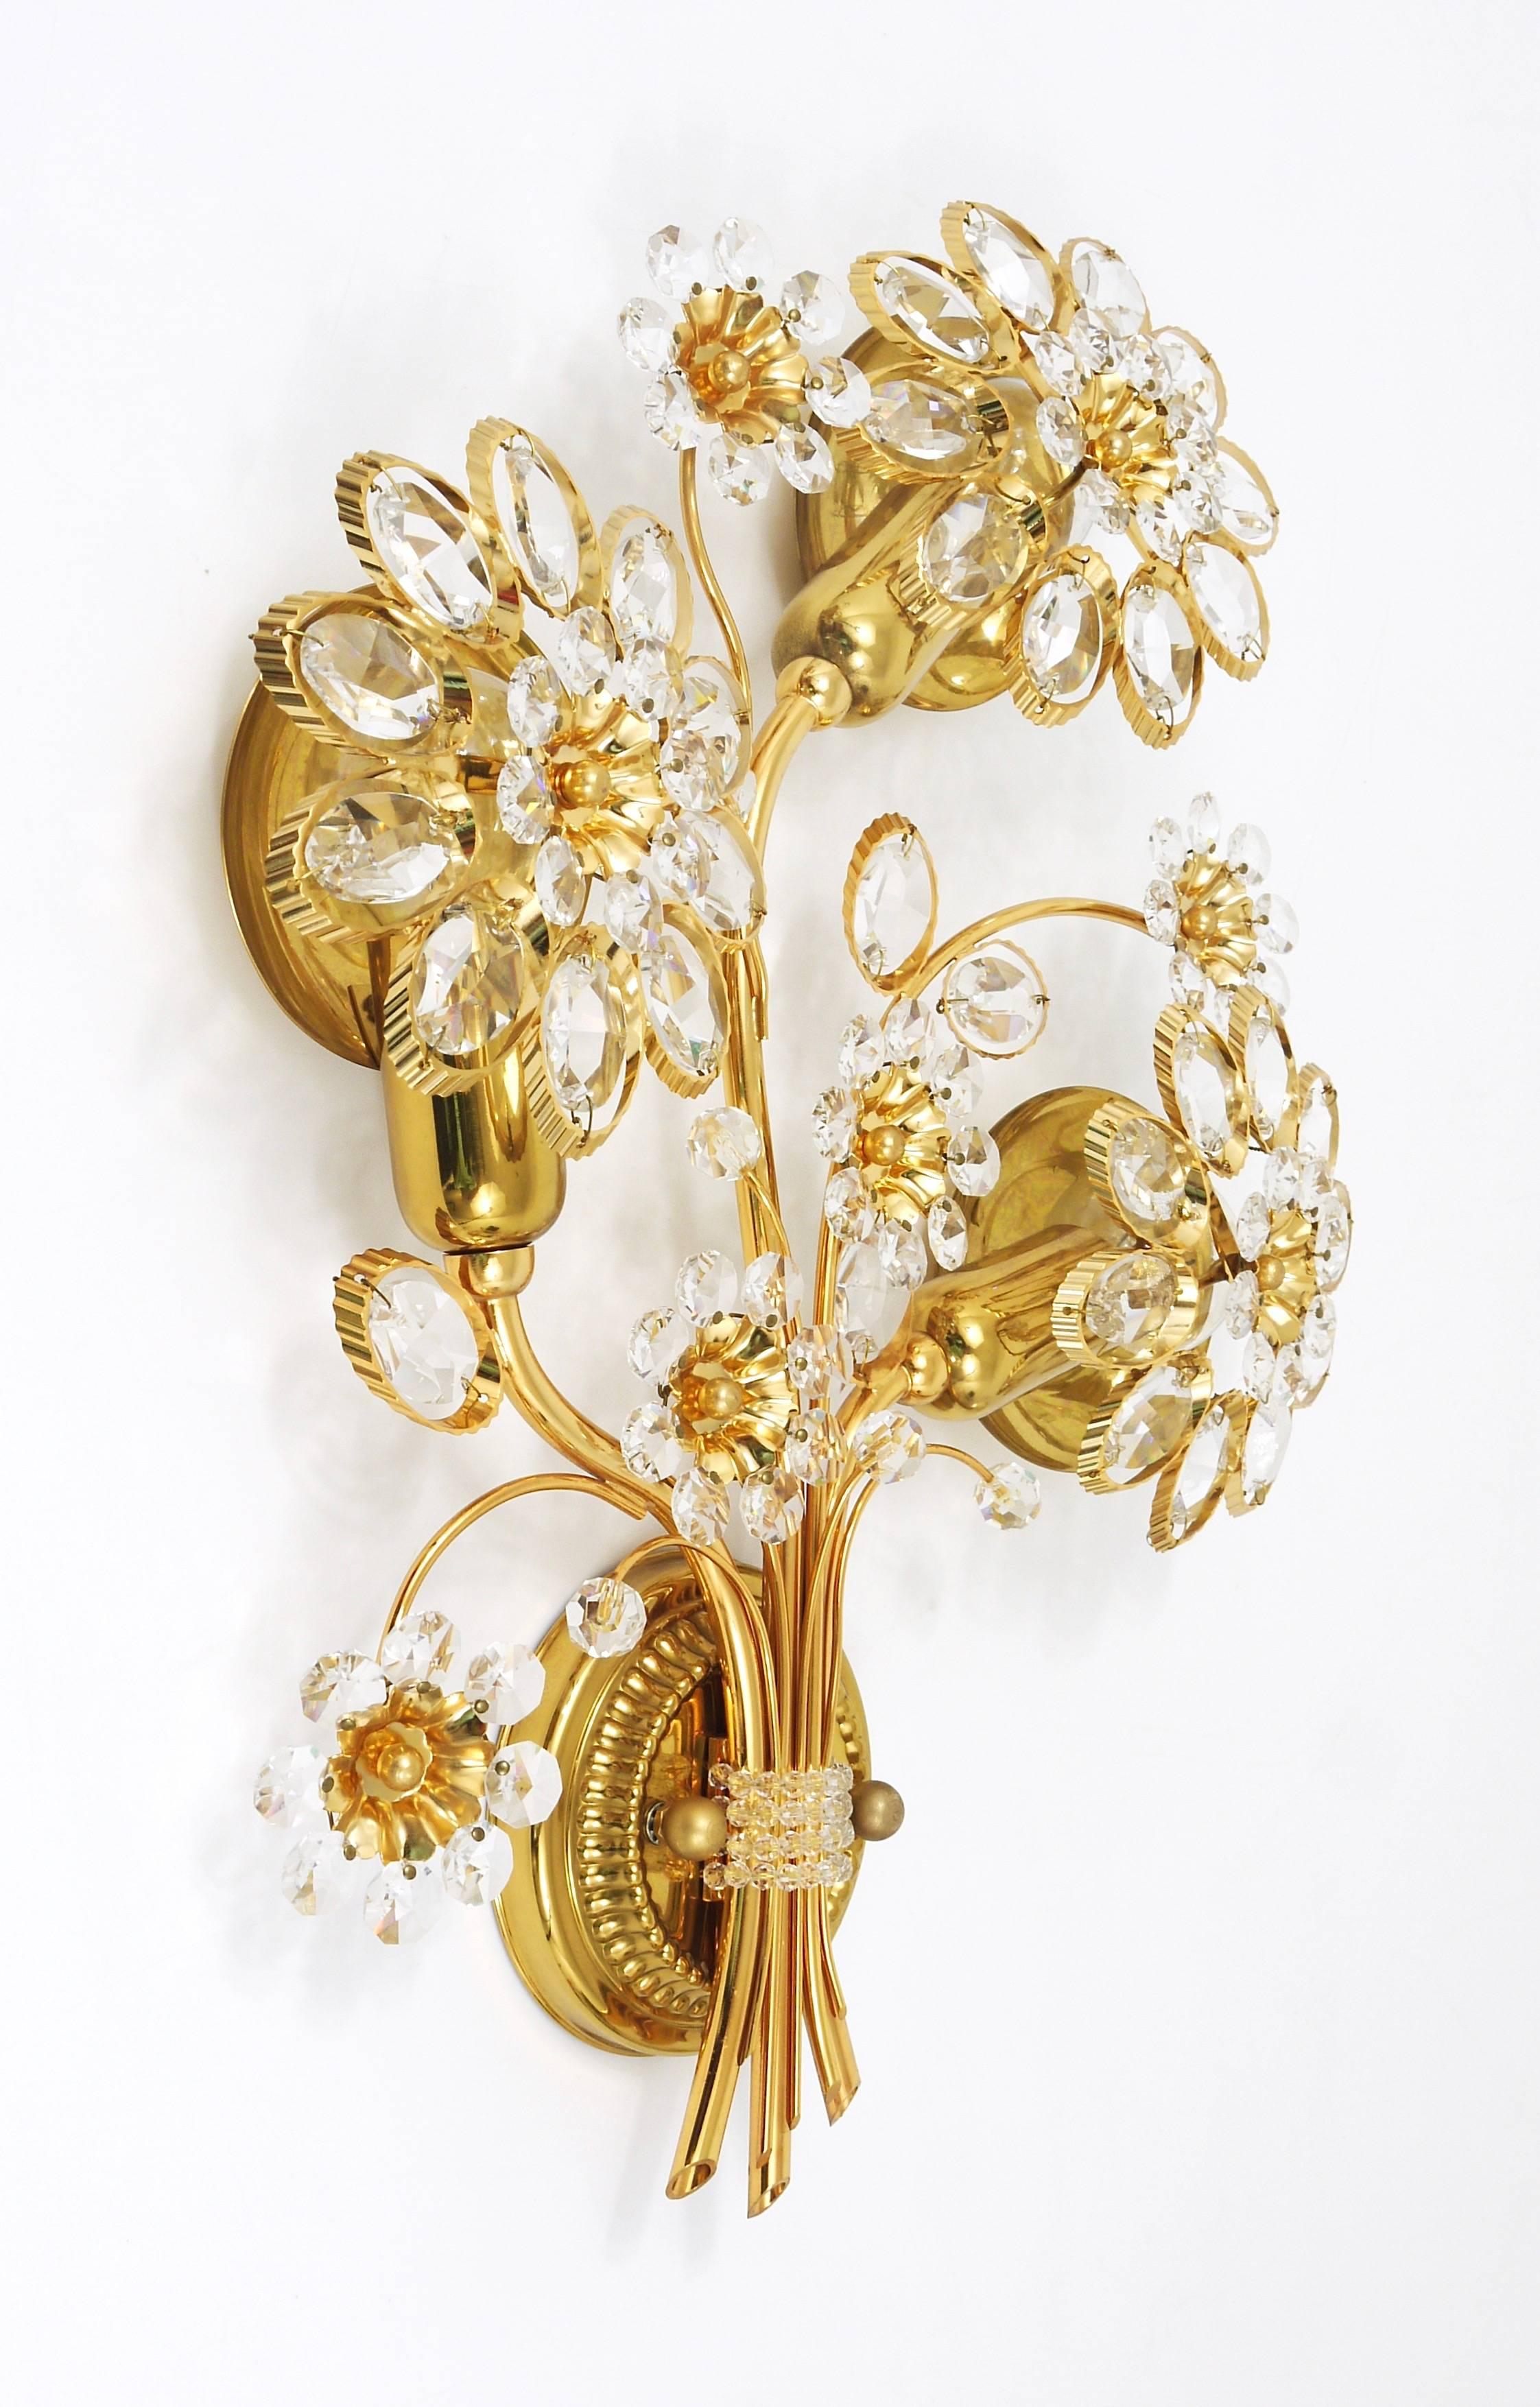 A beautiful and large floral sconce from the 1970s by Ernst Palme, manufactured by by Palwa (Palme & Walter), Germany. Made of gold-plated brass with crystal glass petals. In excellent condition. We offer various matching sconces, mirrors and